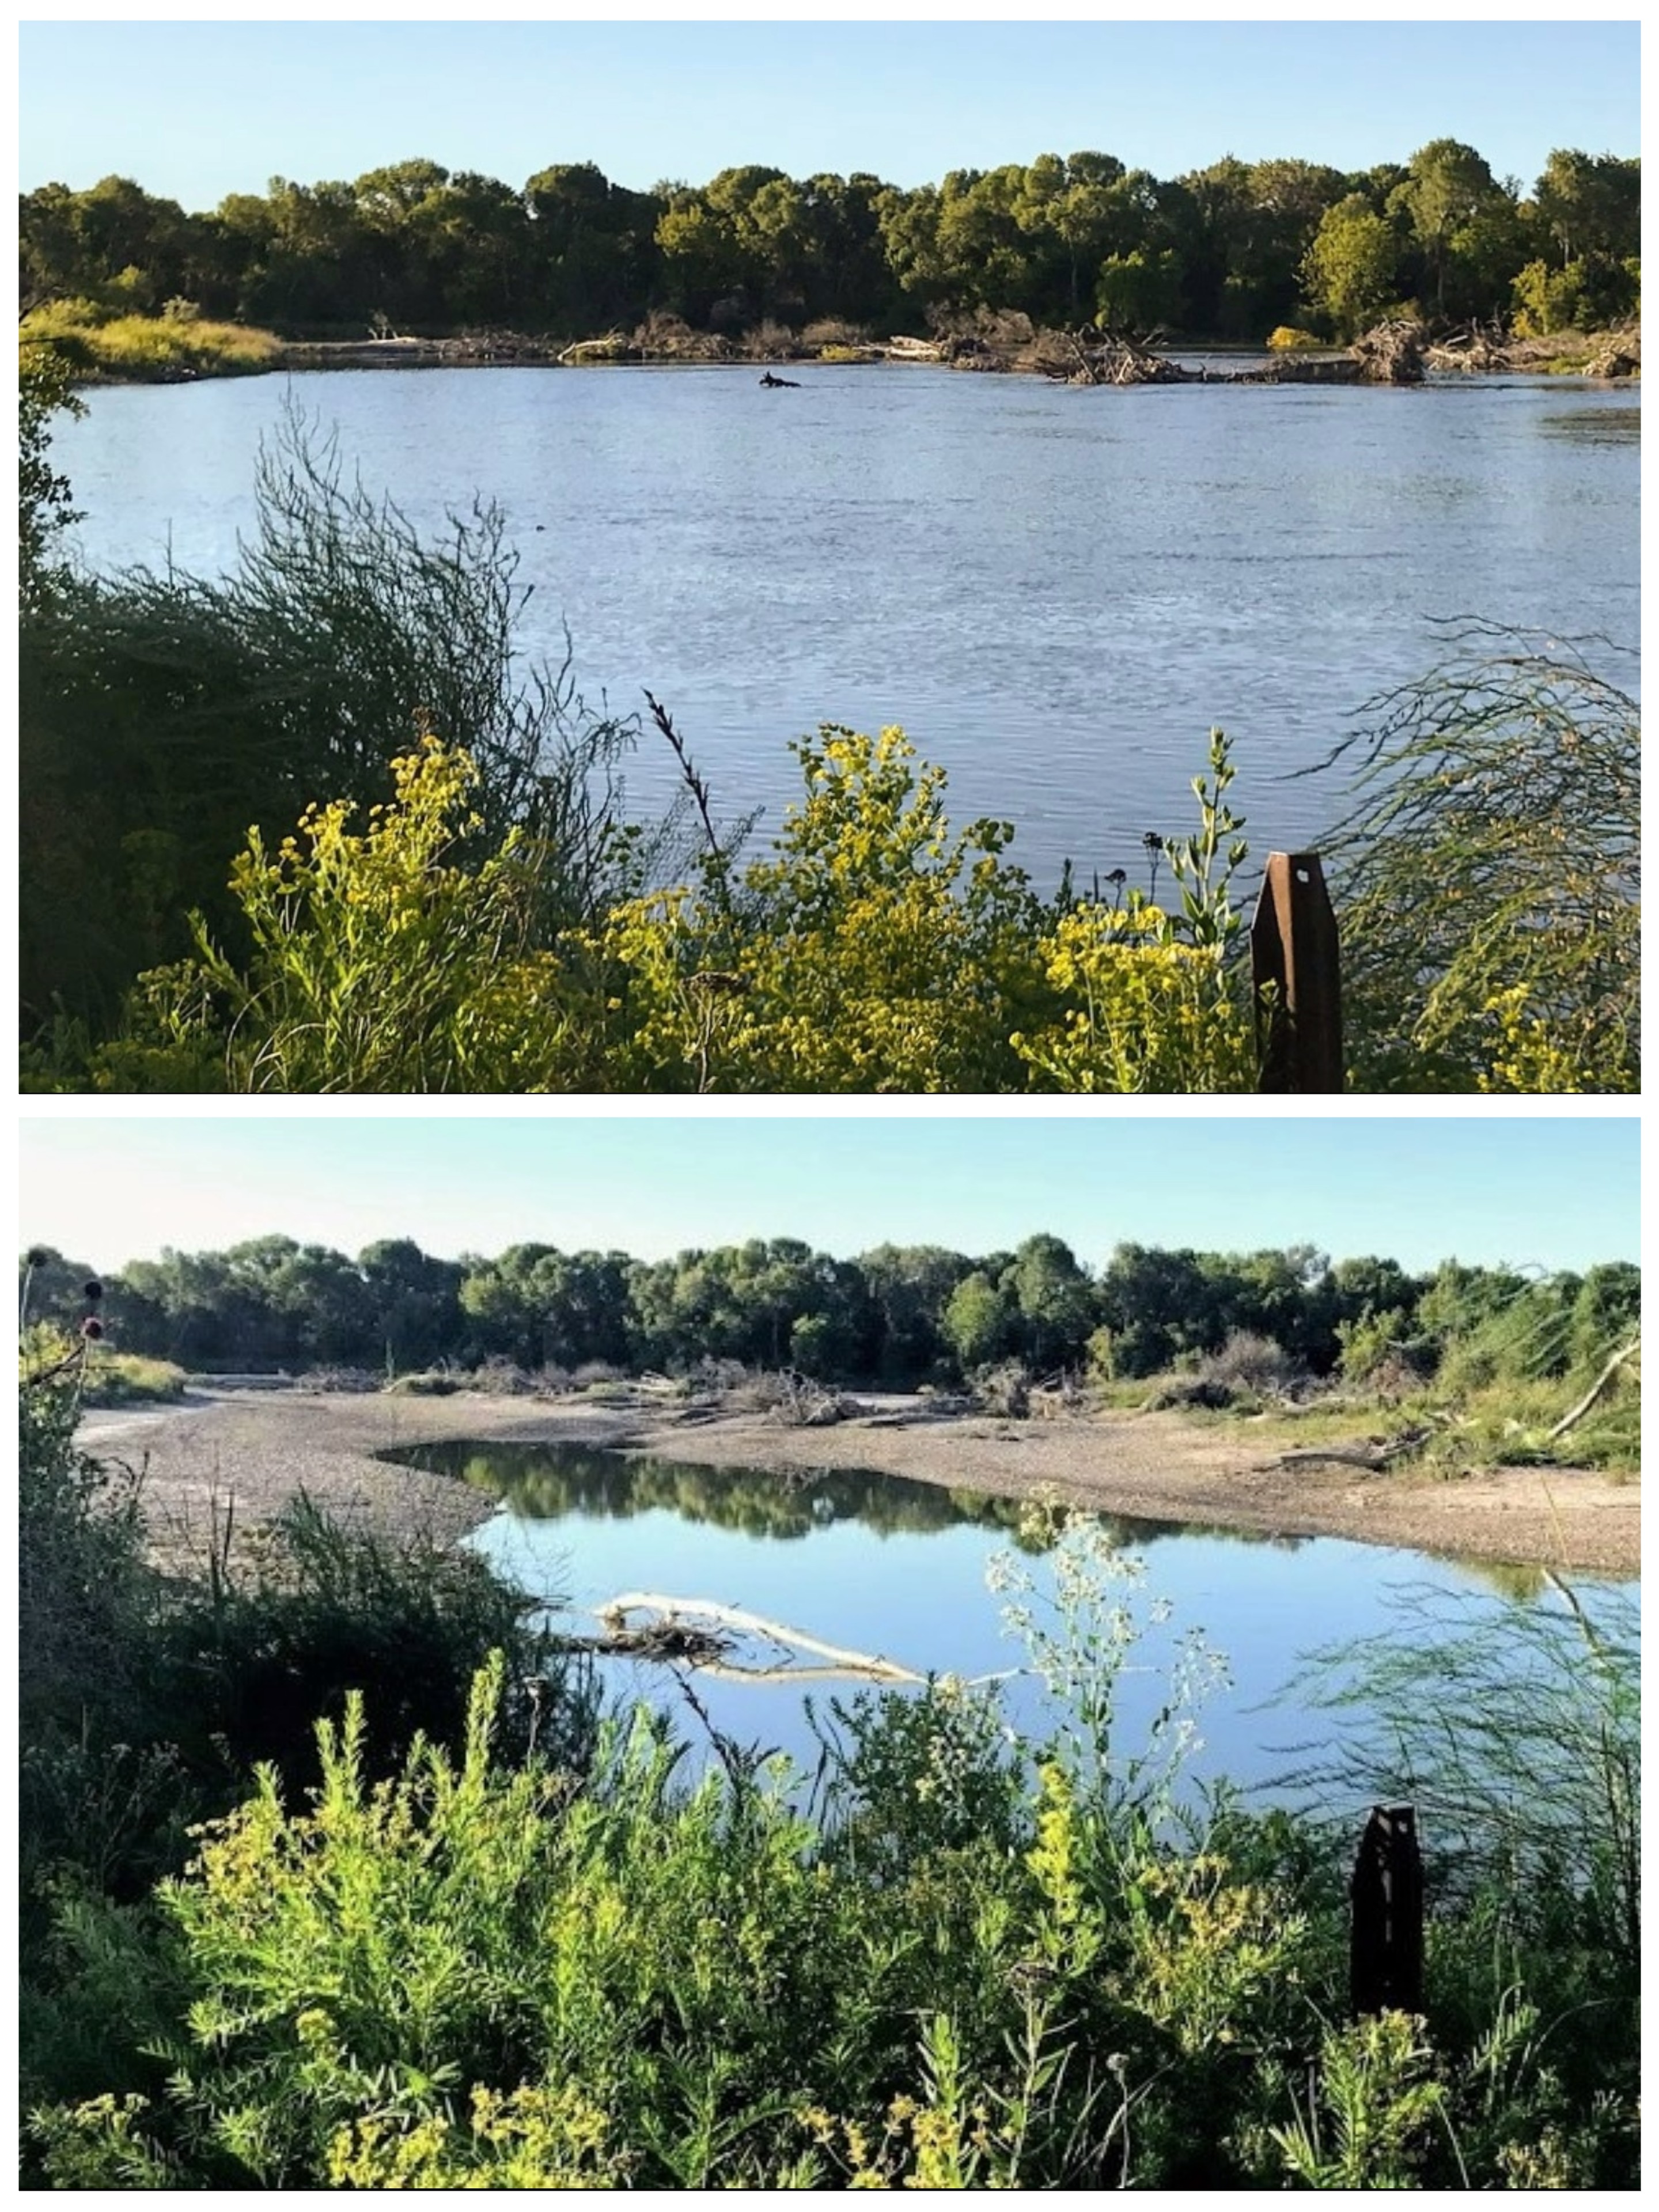 the top photo shows a wide view of a river with a small dot, which is a moose's head sticking above the water. the bottom image shows the same trees, but the view is about half land rather than mostly water